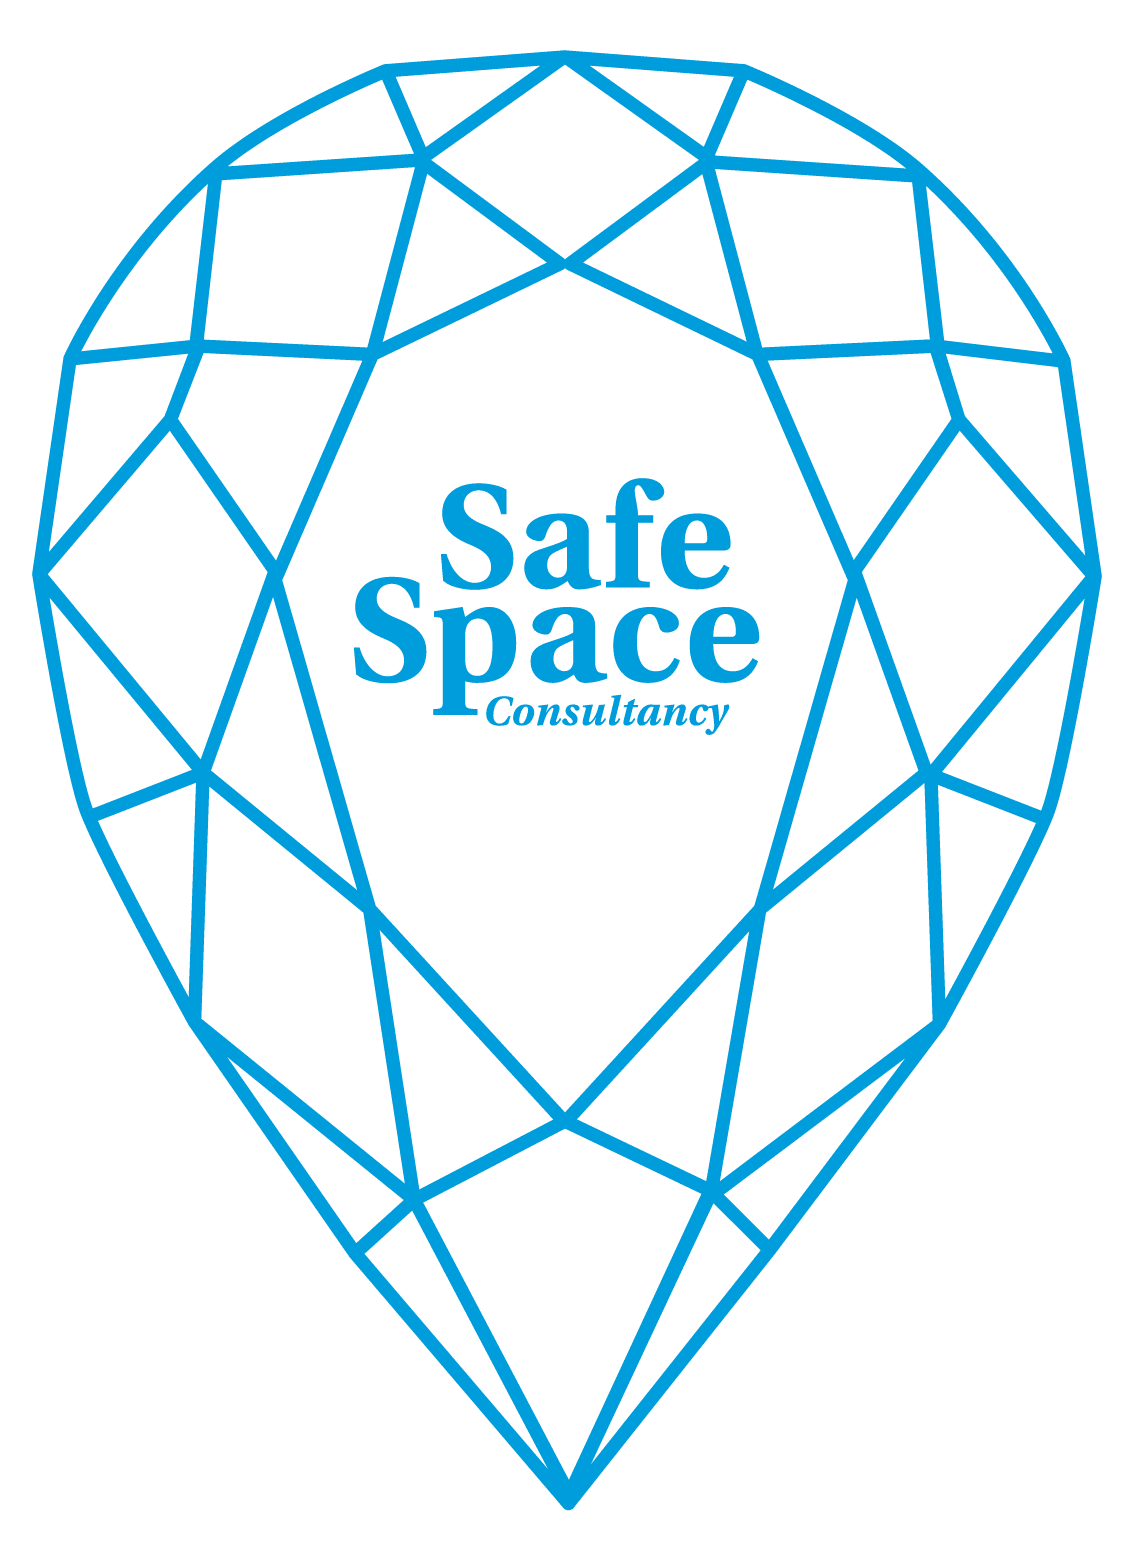 Safe Space Consultancy